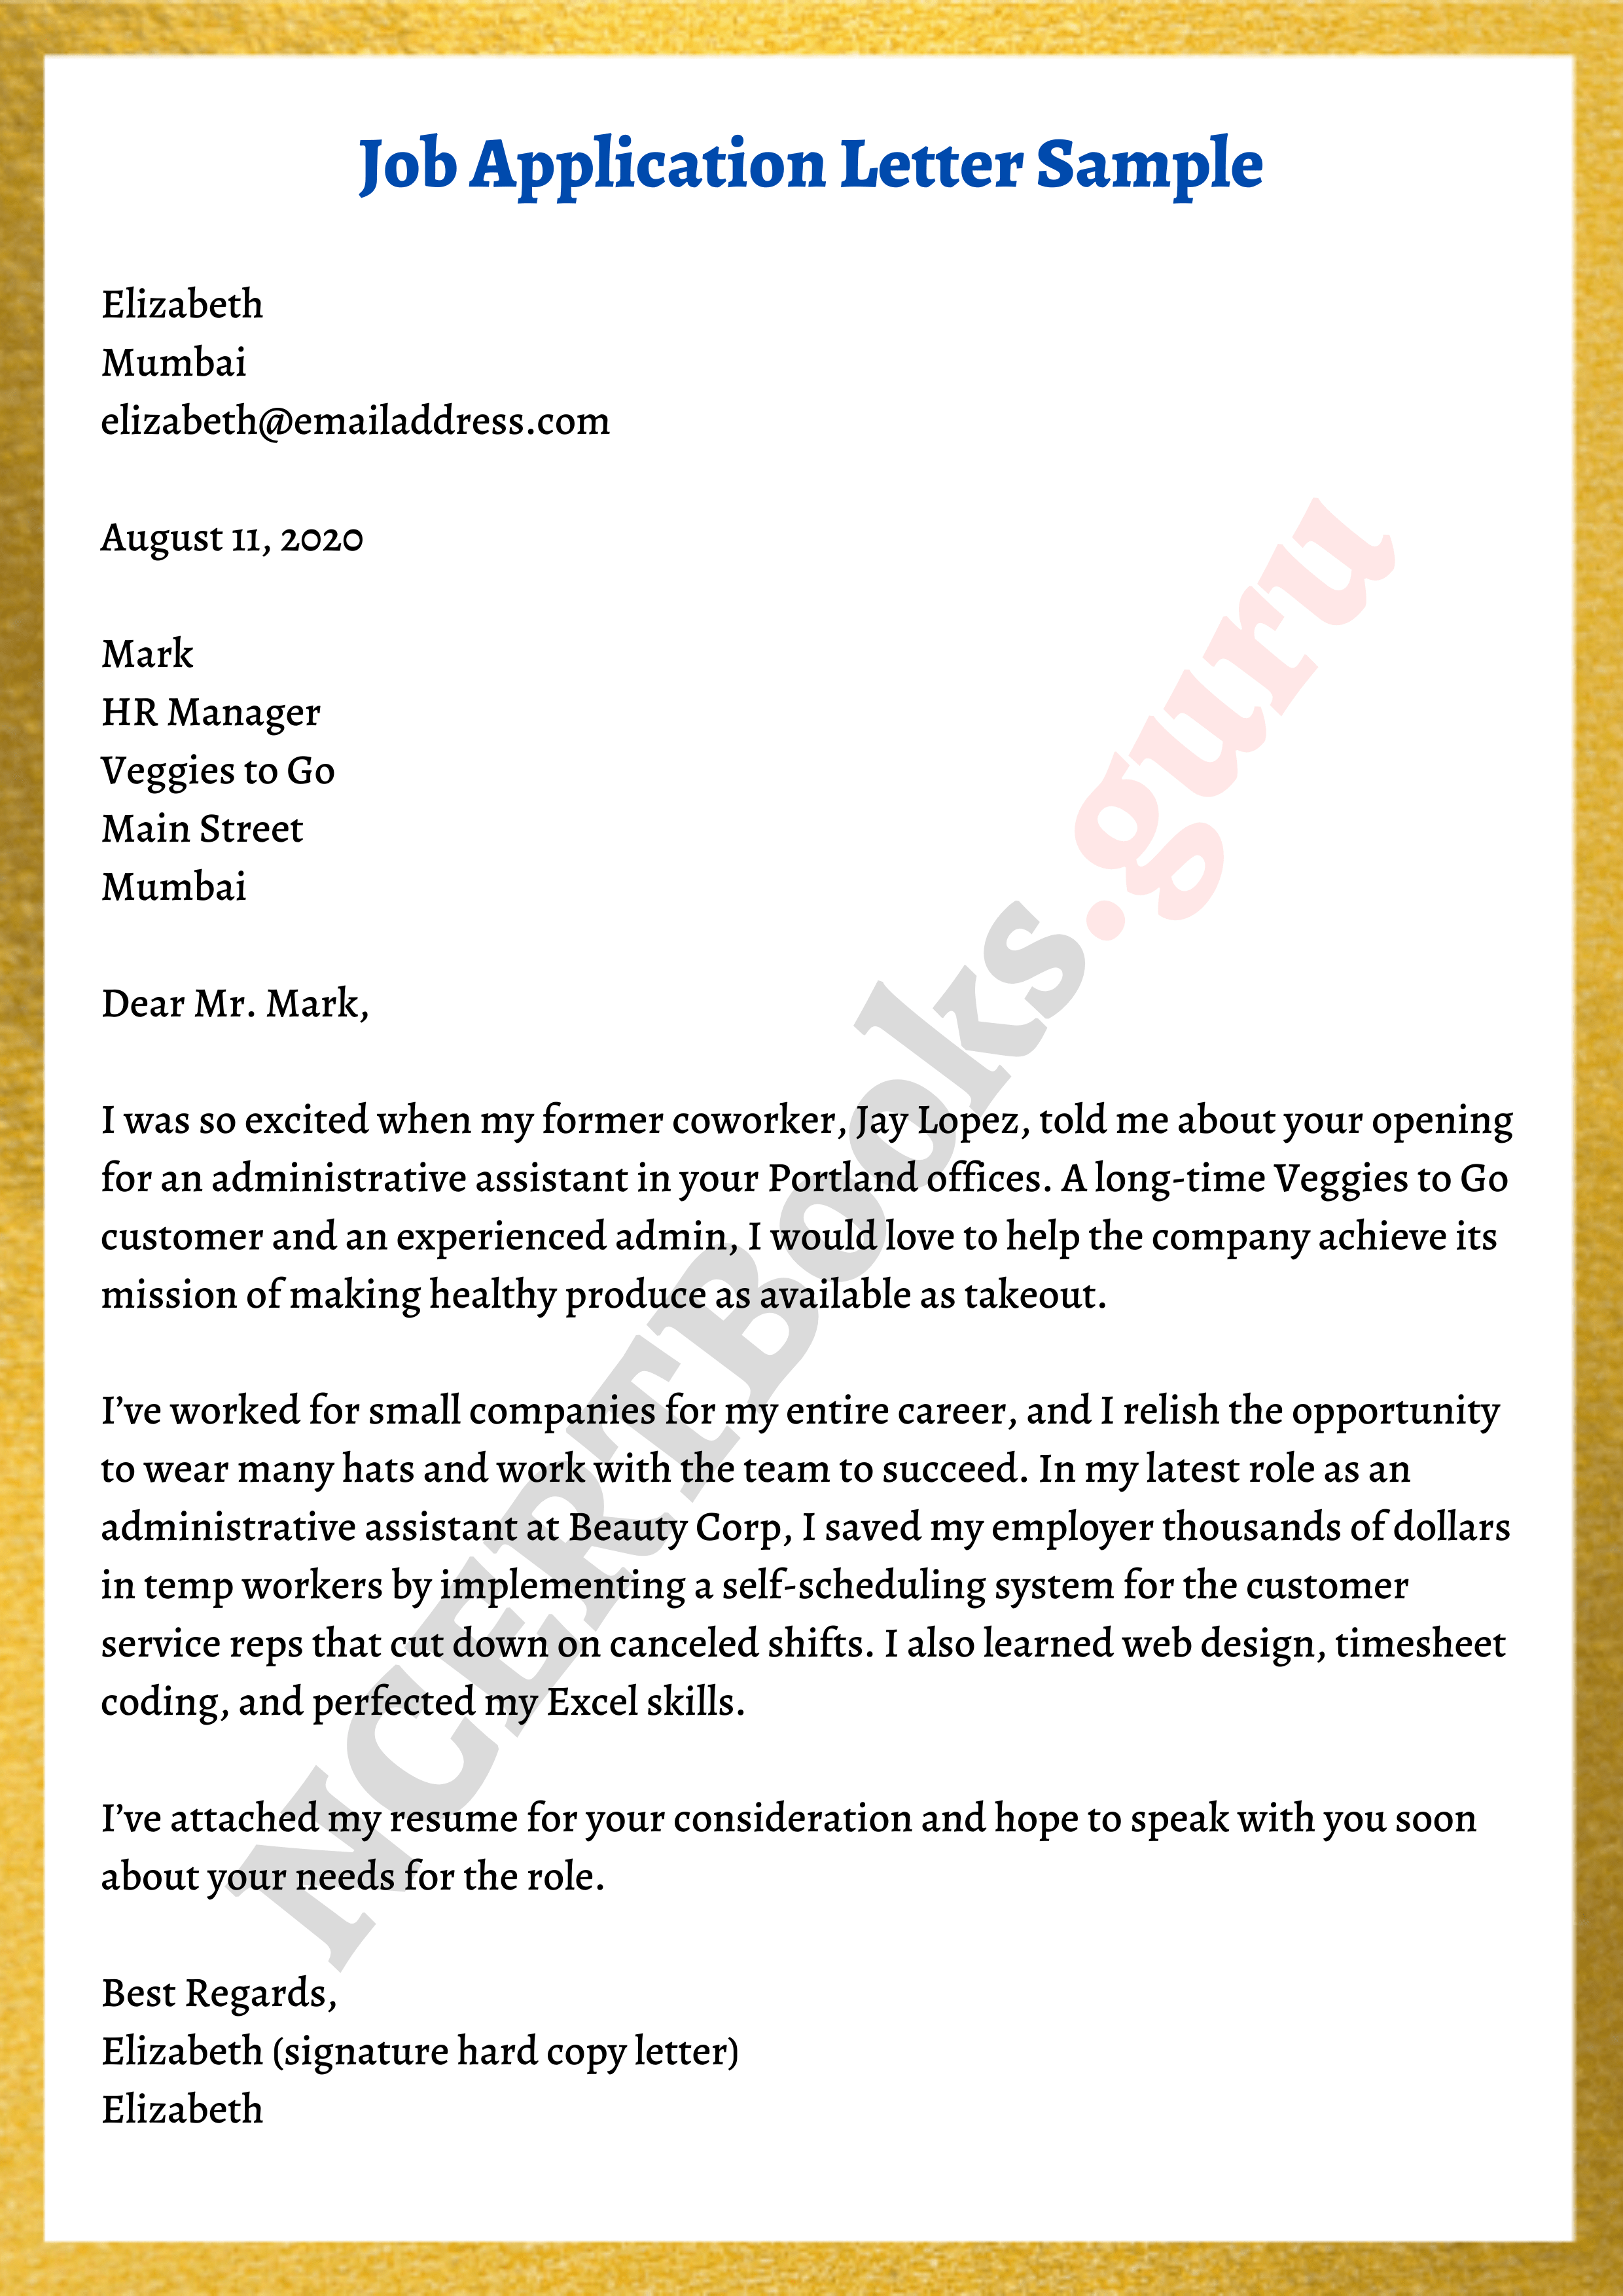 introduction to a job application letter